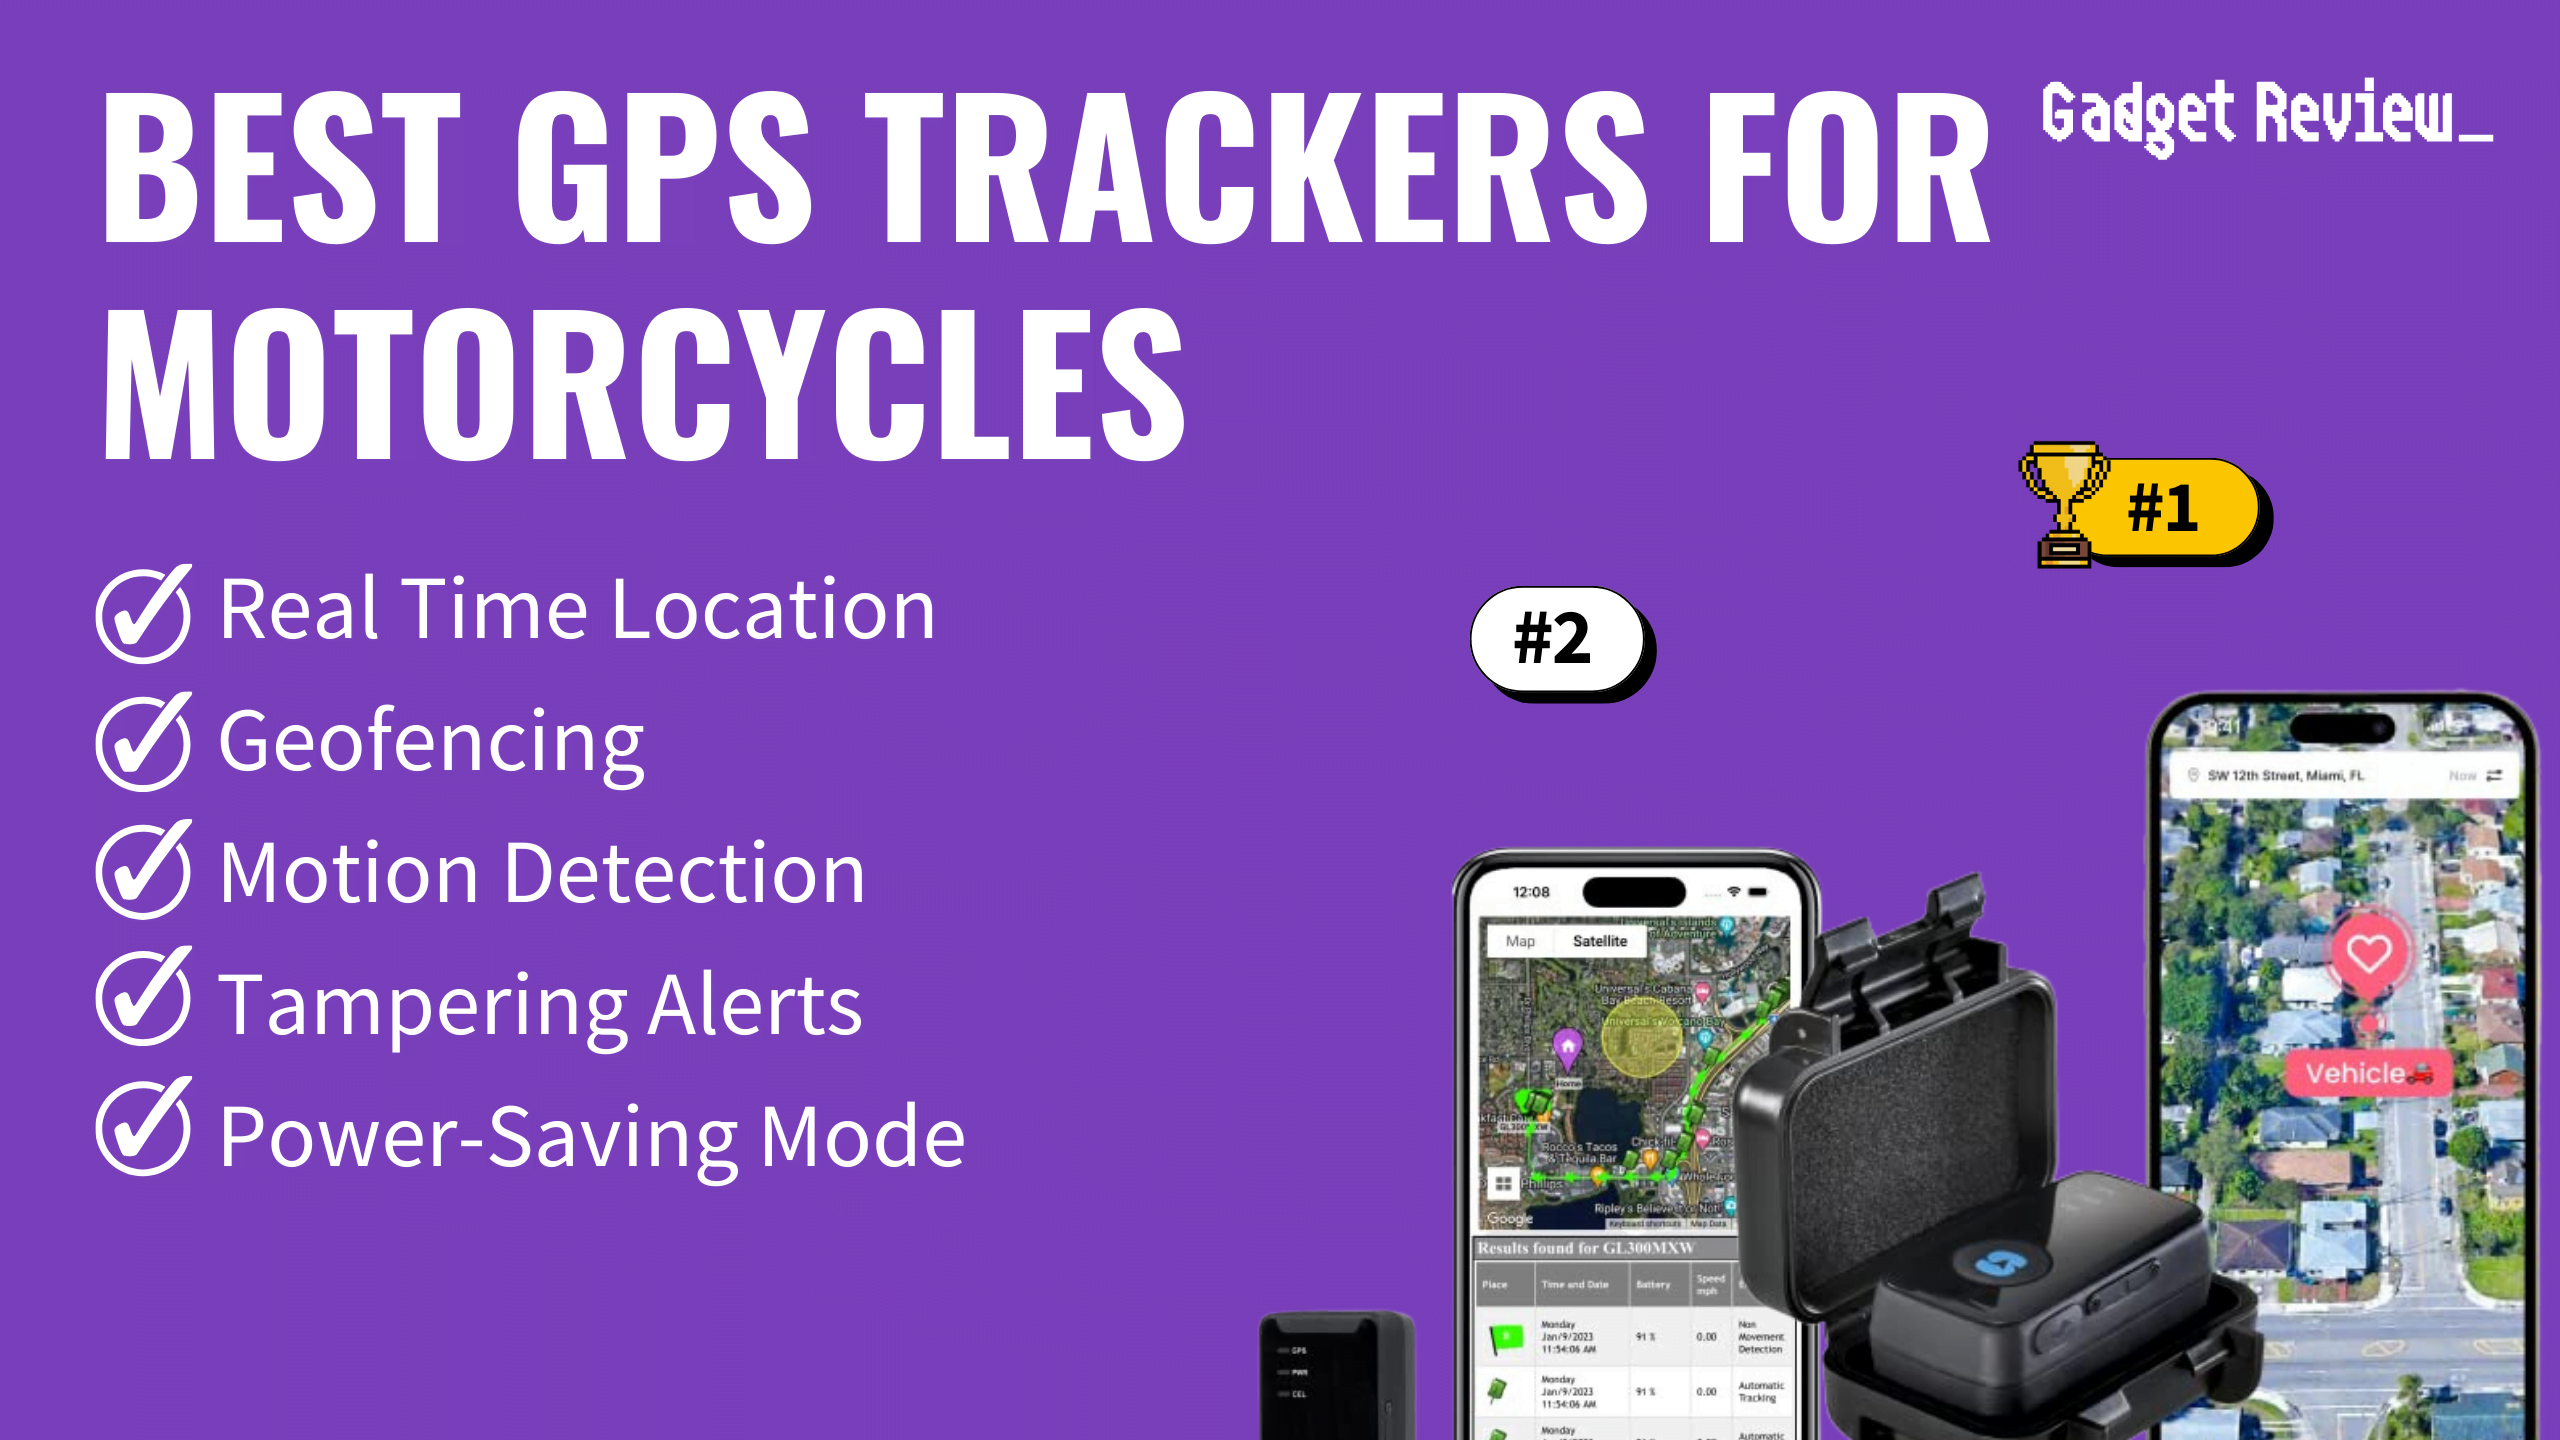 Best GPS Trackers for Motorcycles